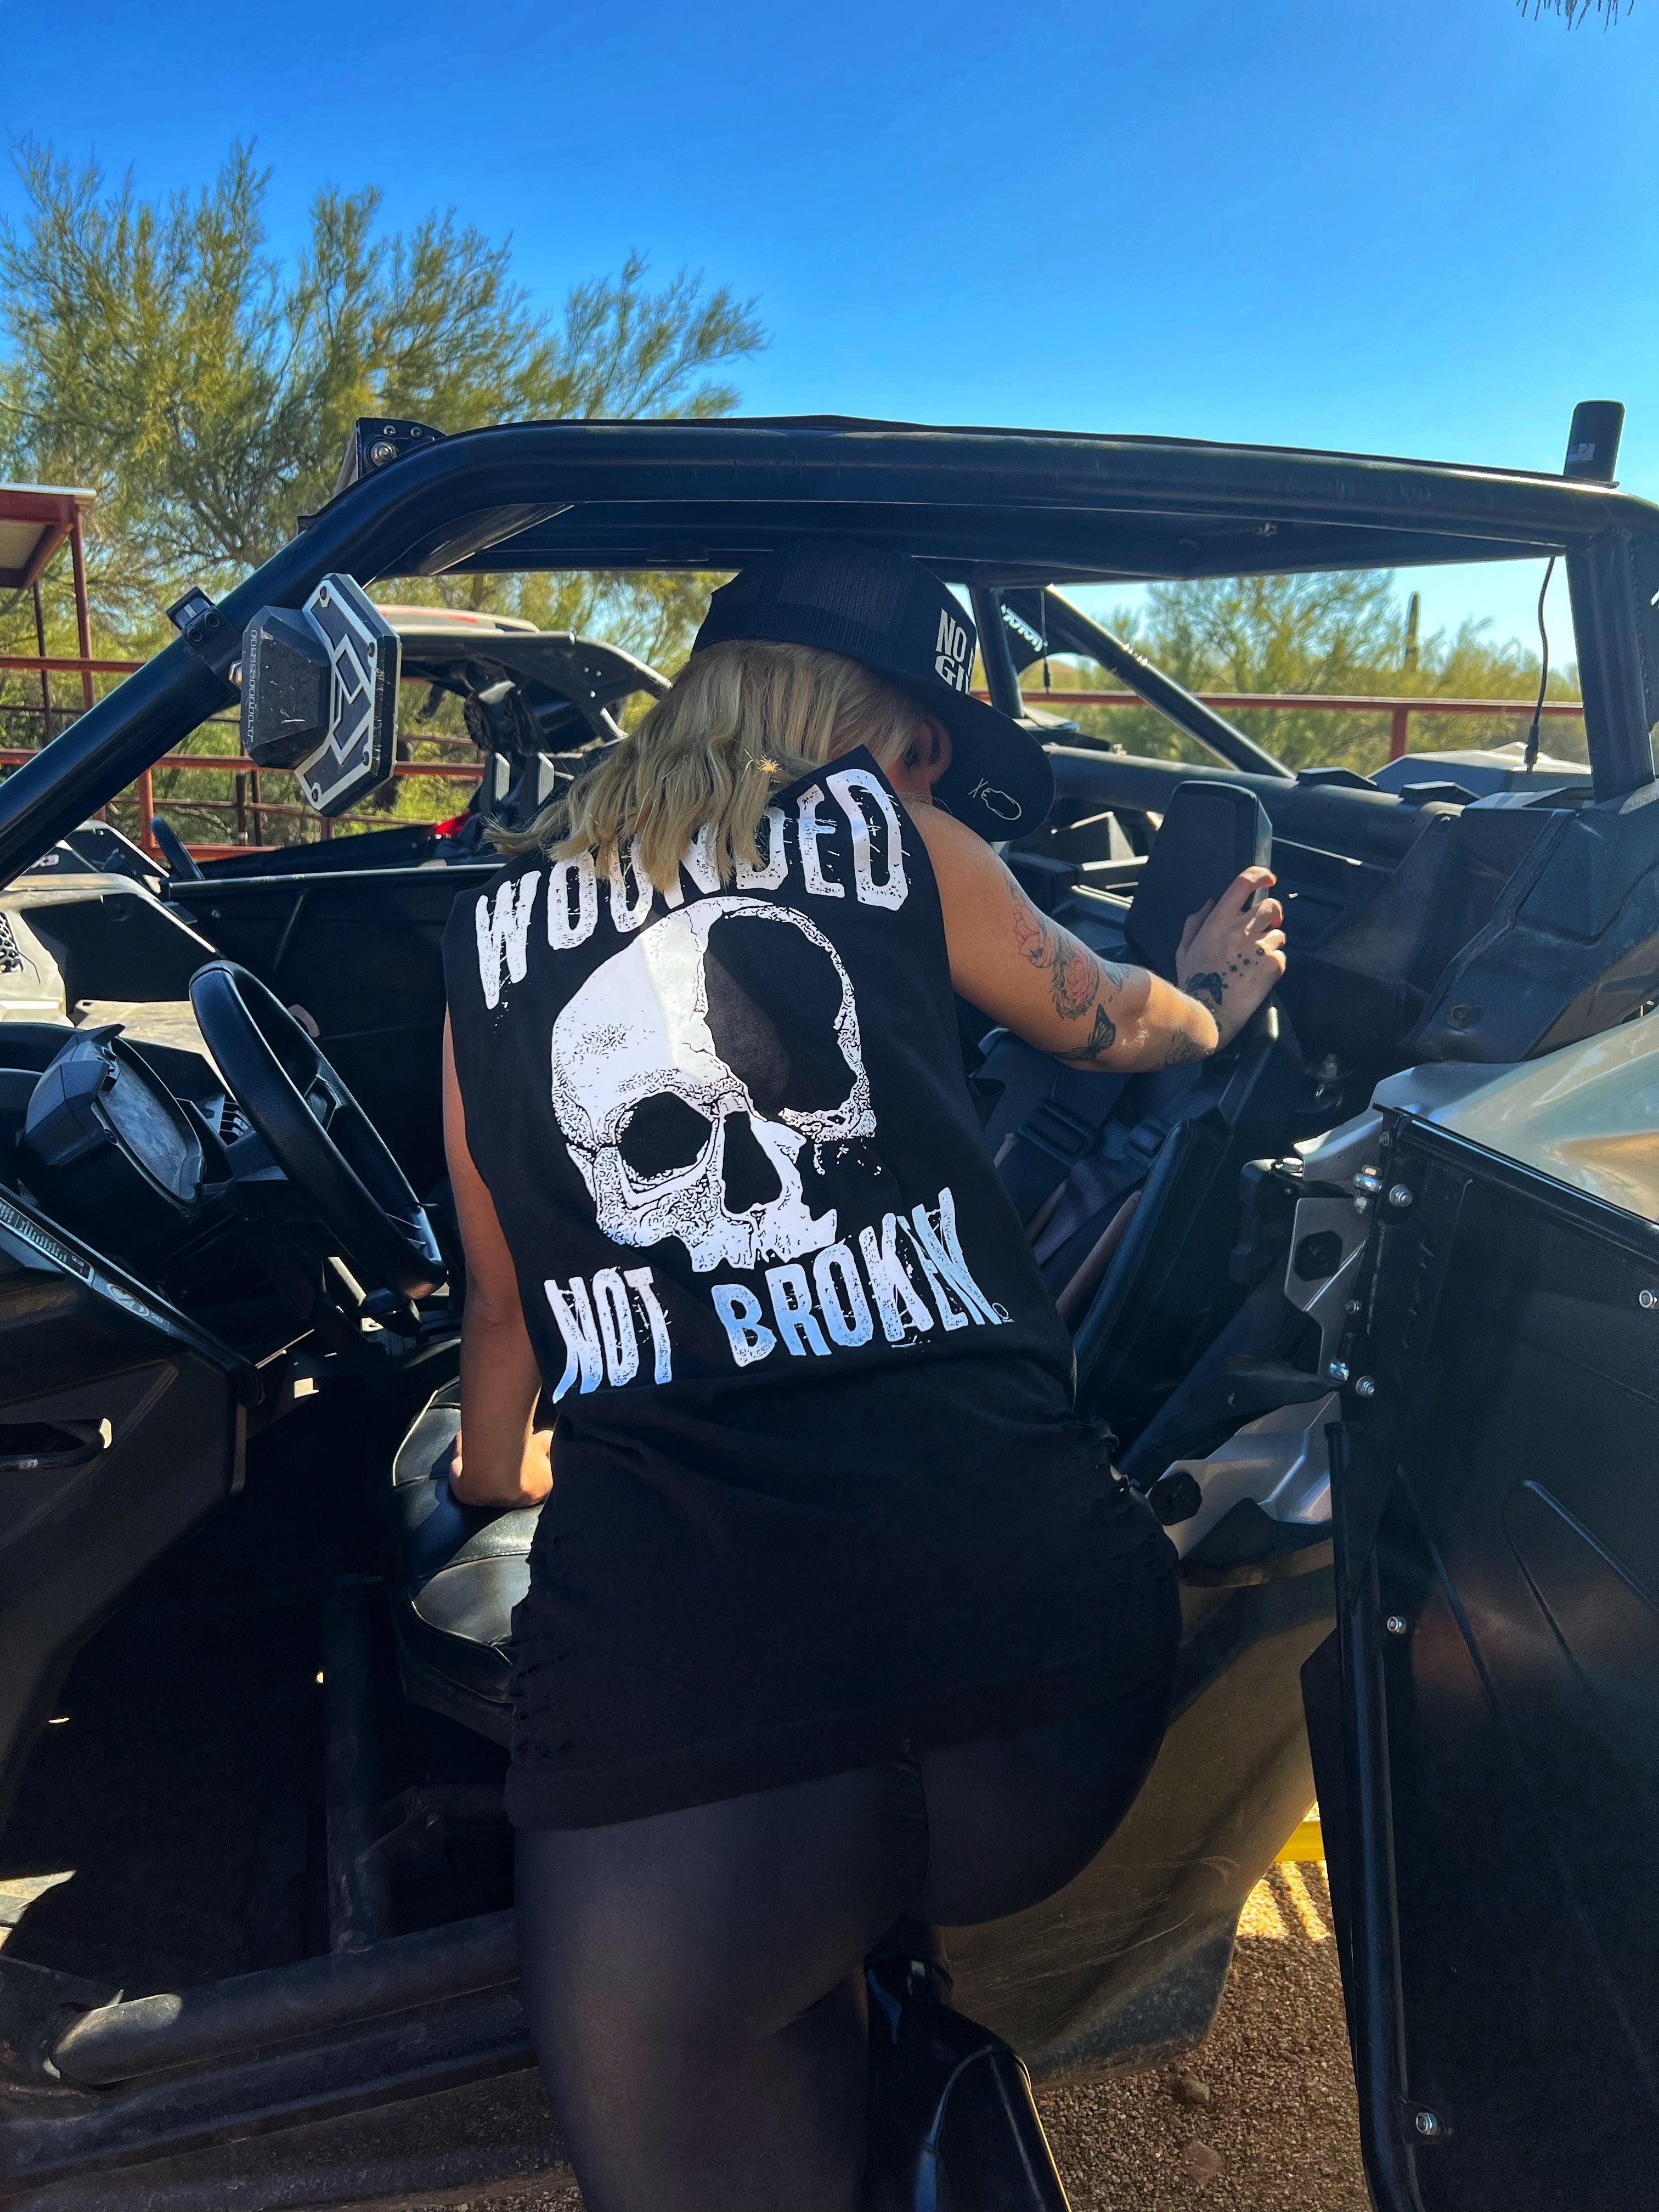 WOUNDED NOT BROKEN TANK TOP - The Drive Clothing